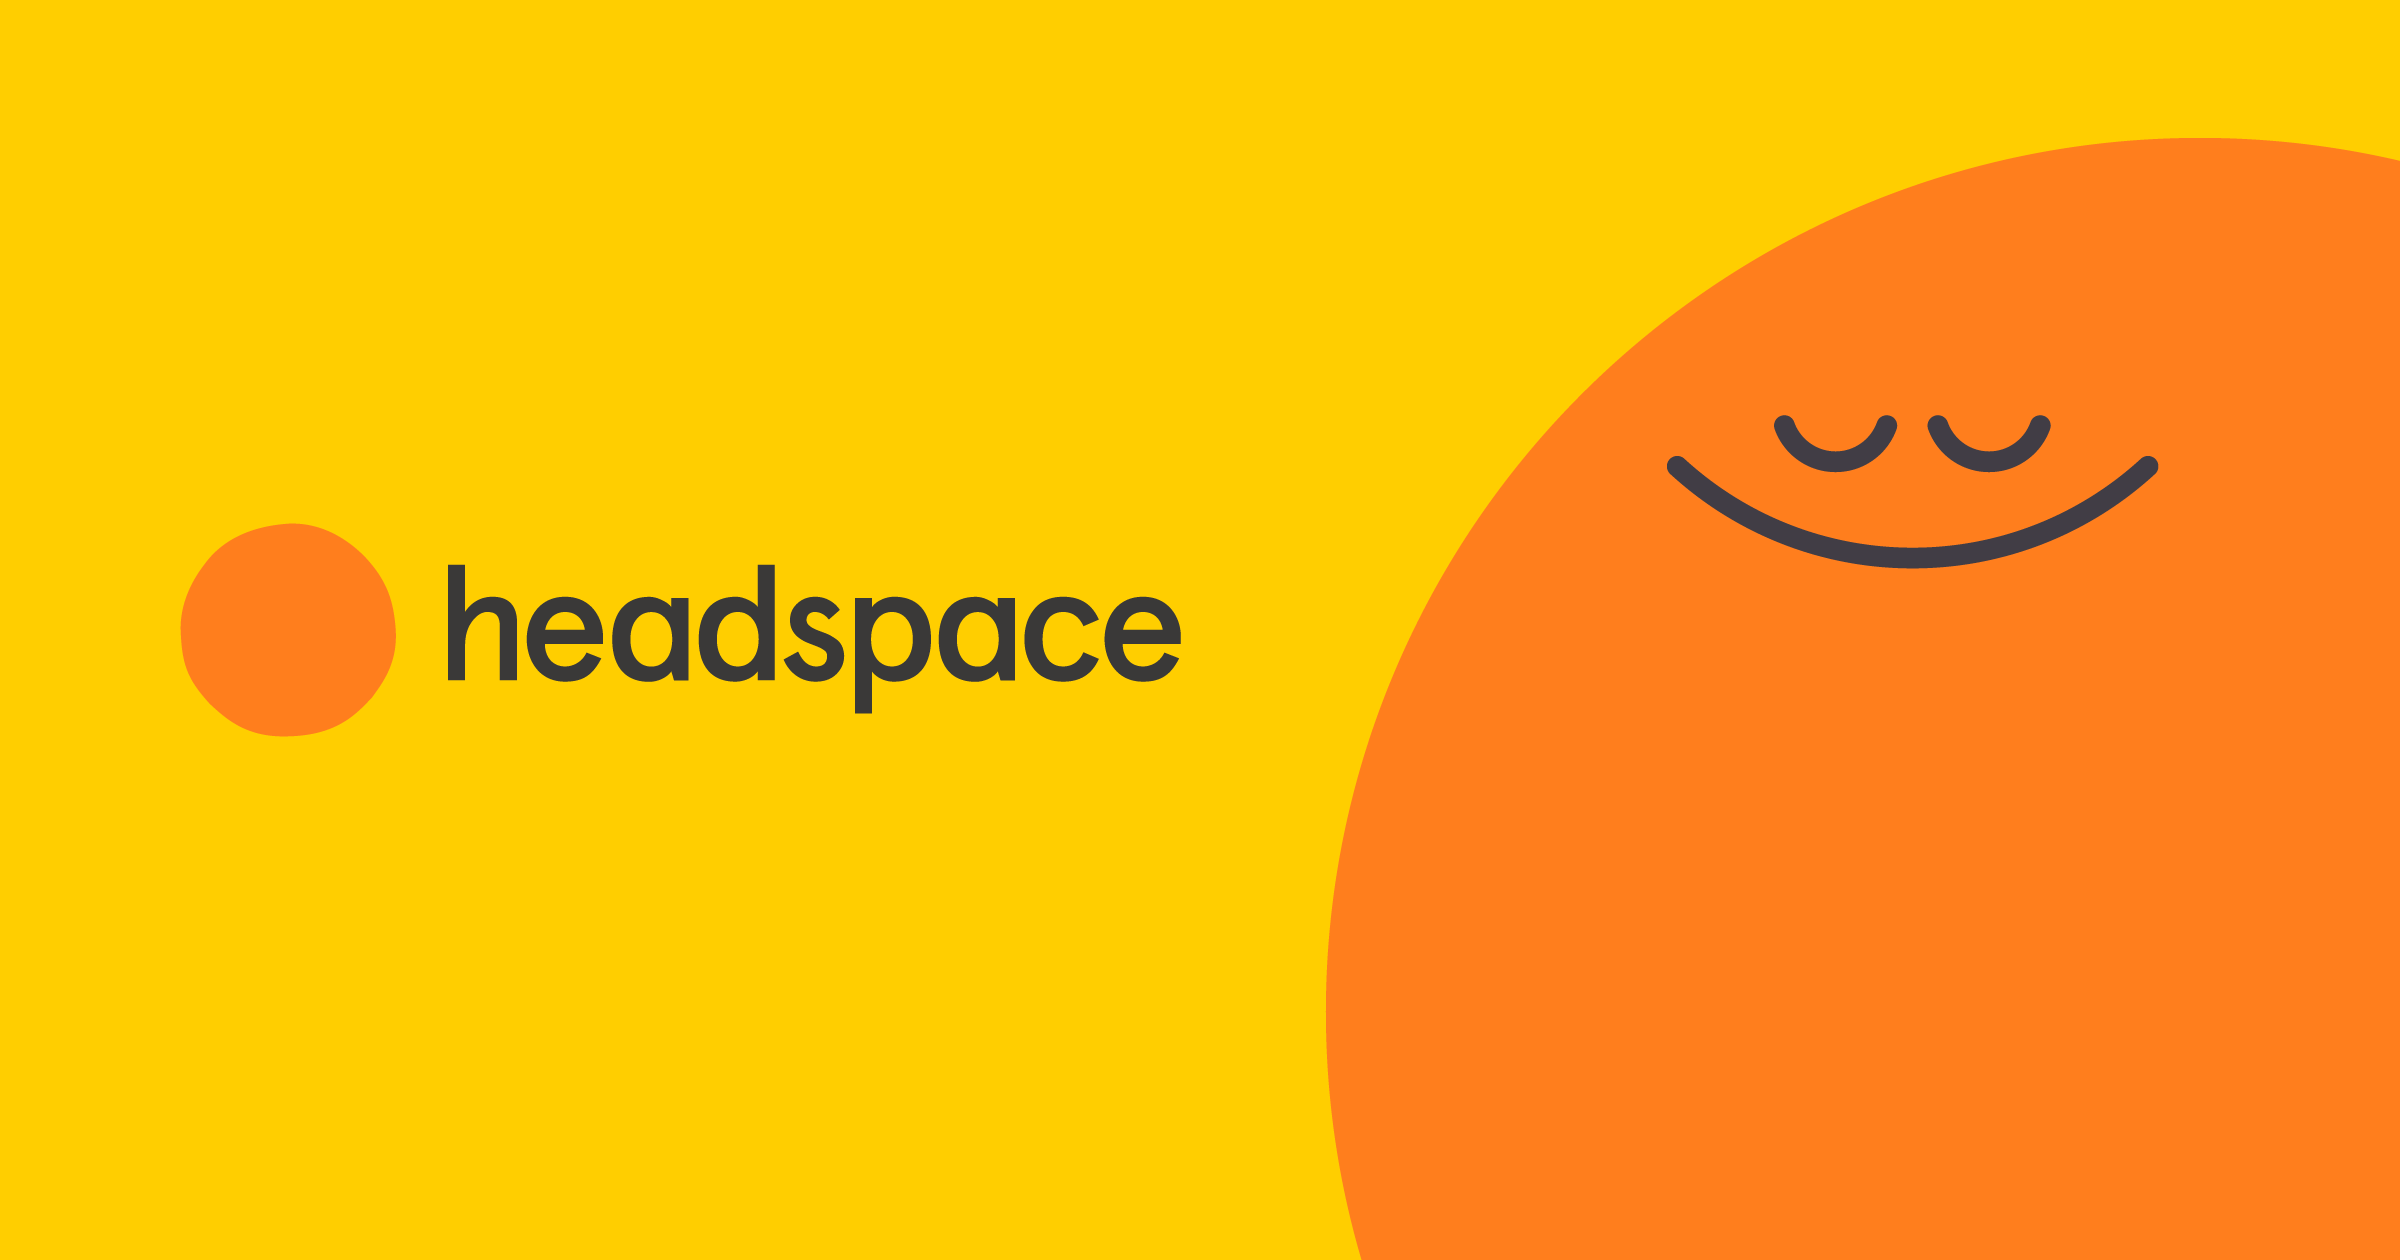 Headspace is a popular meditation app that helps users through guided lessons on sleep and mindfulness